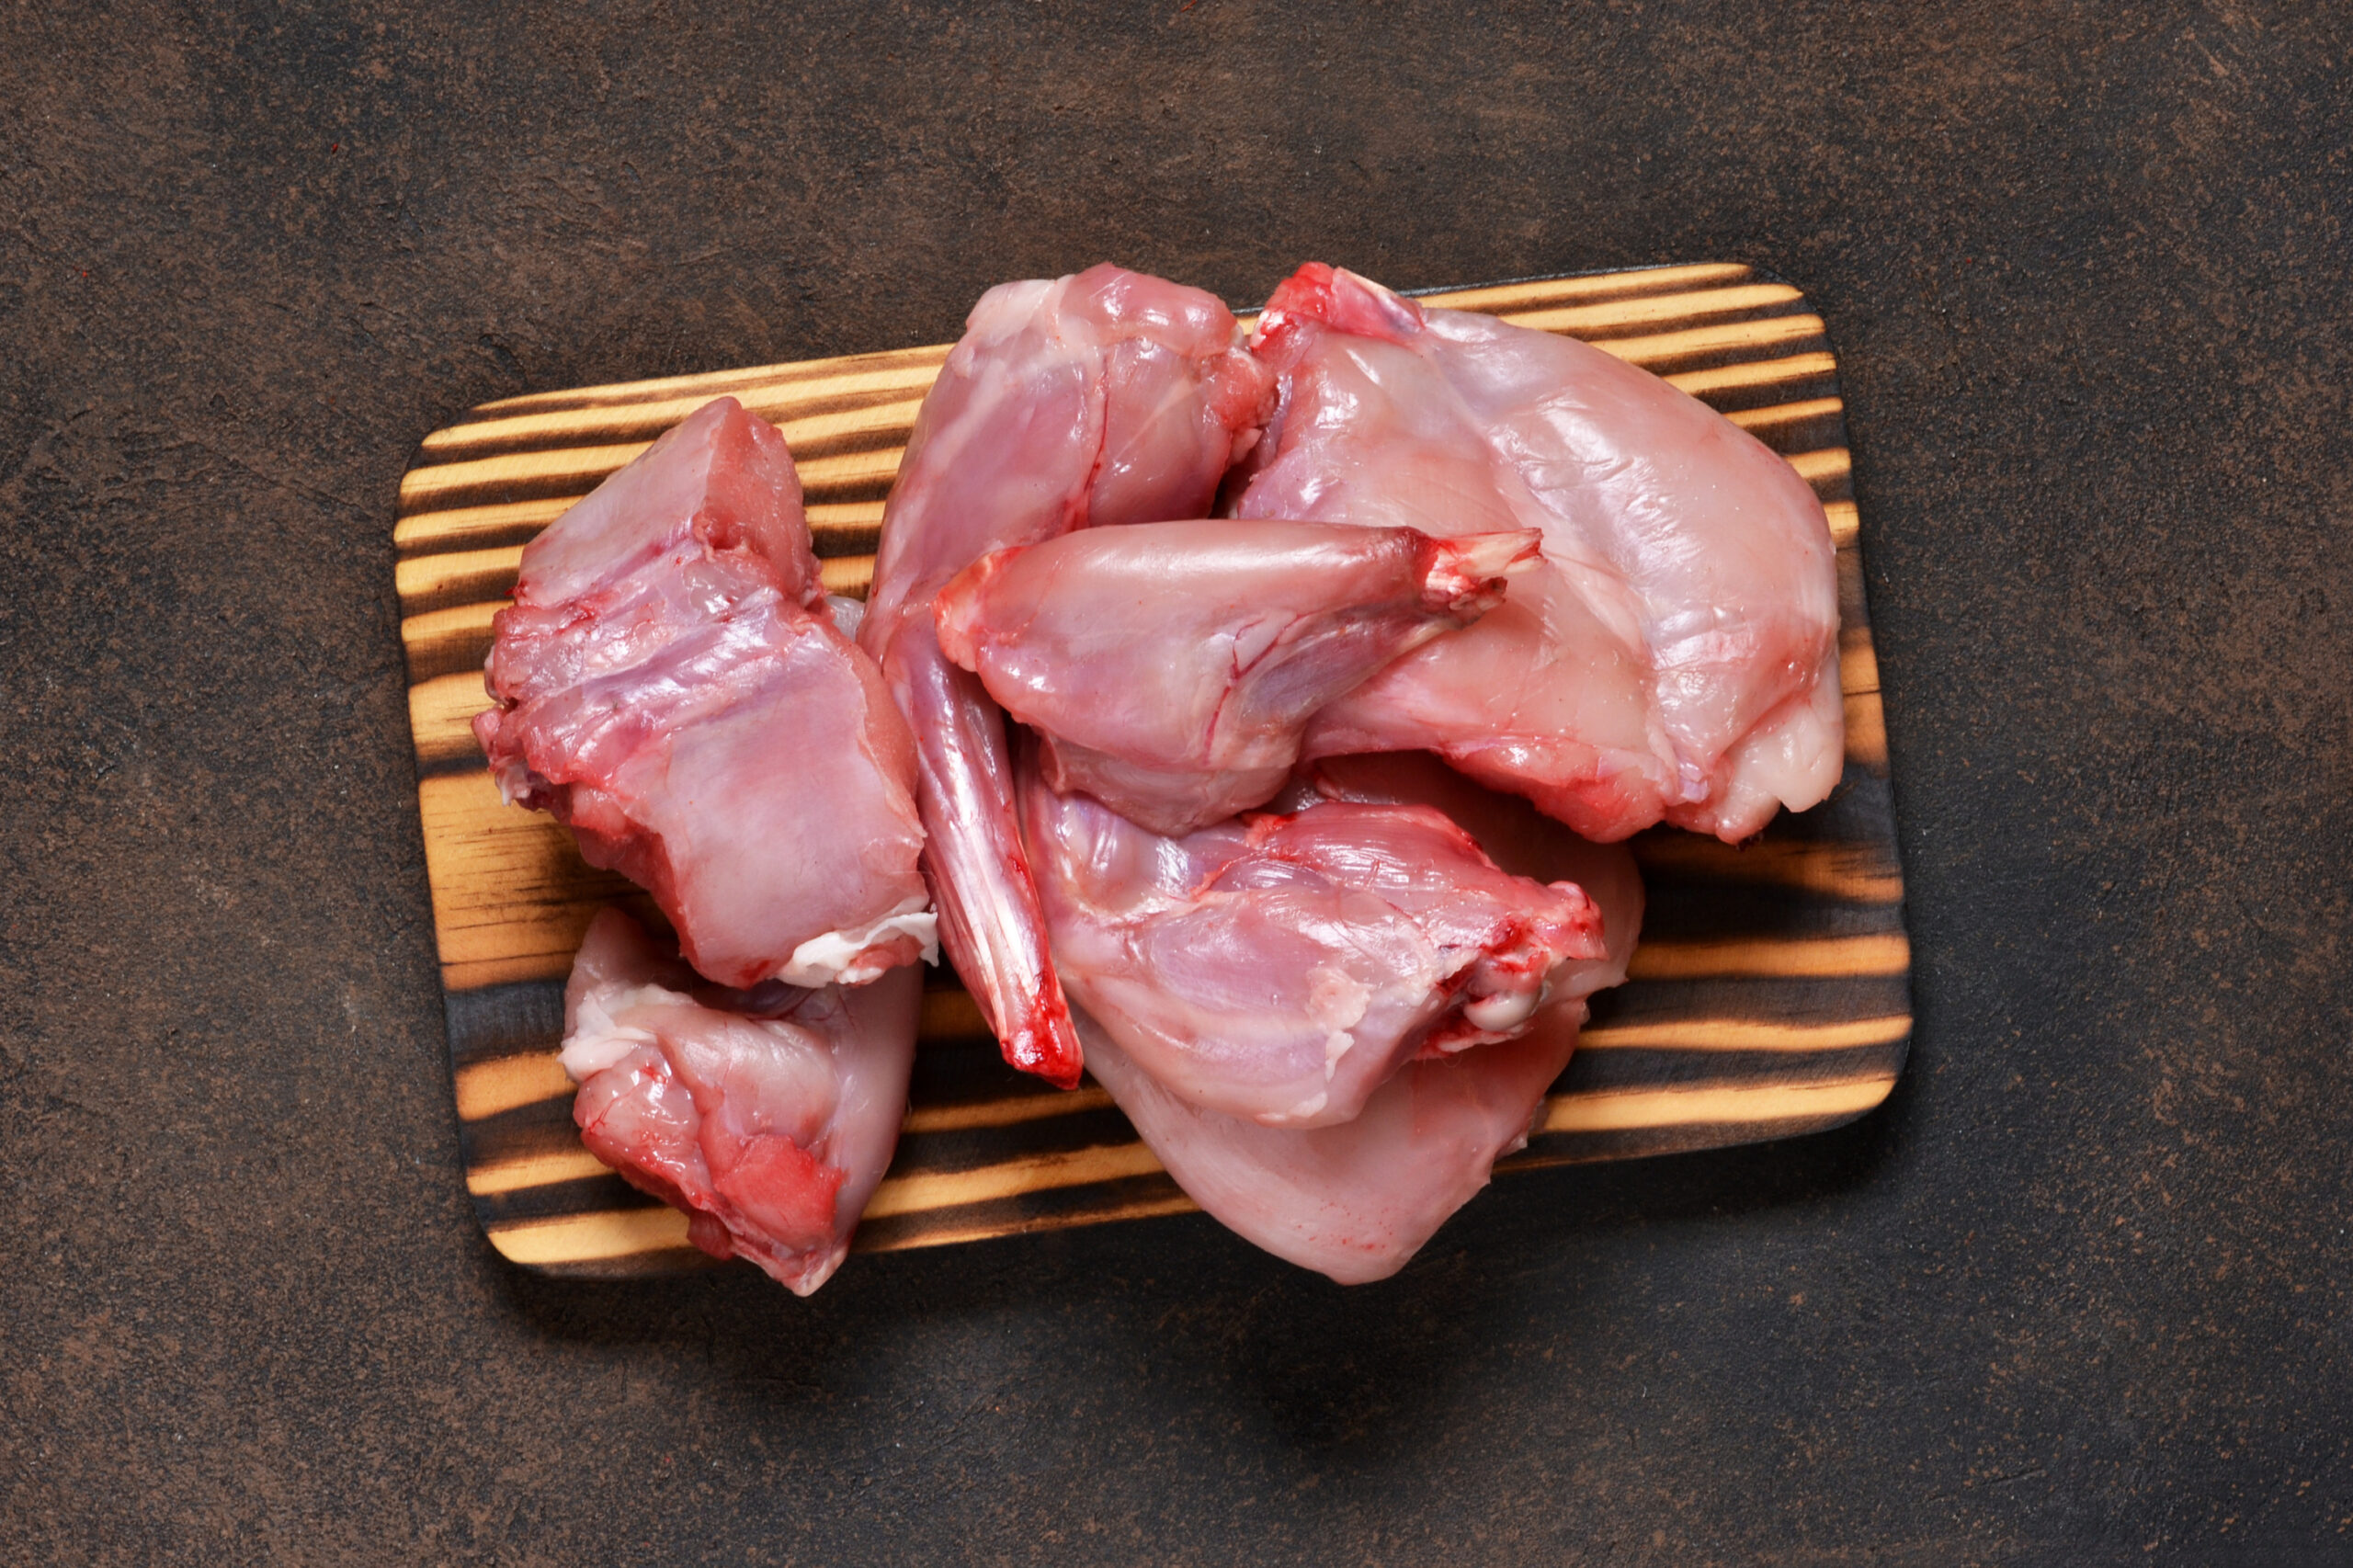 What Are the Benefits of Eating Rabbit Meat? livestrong